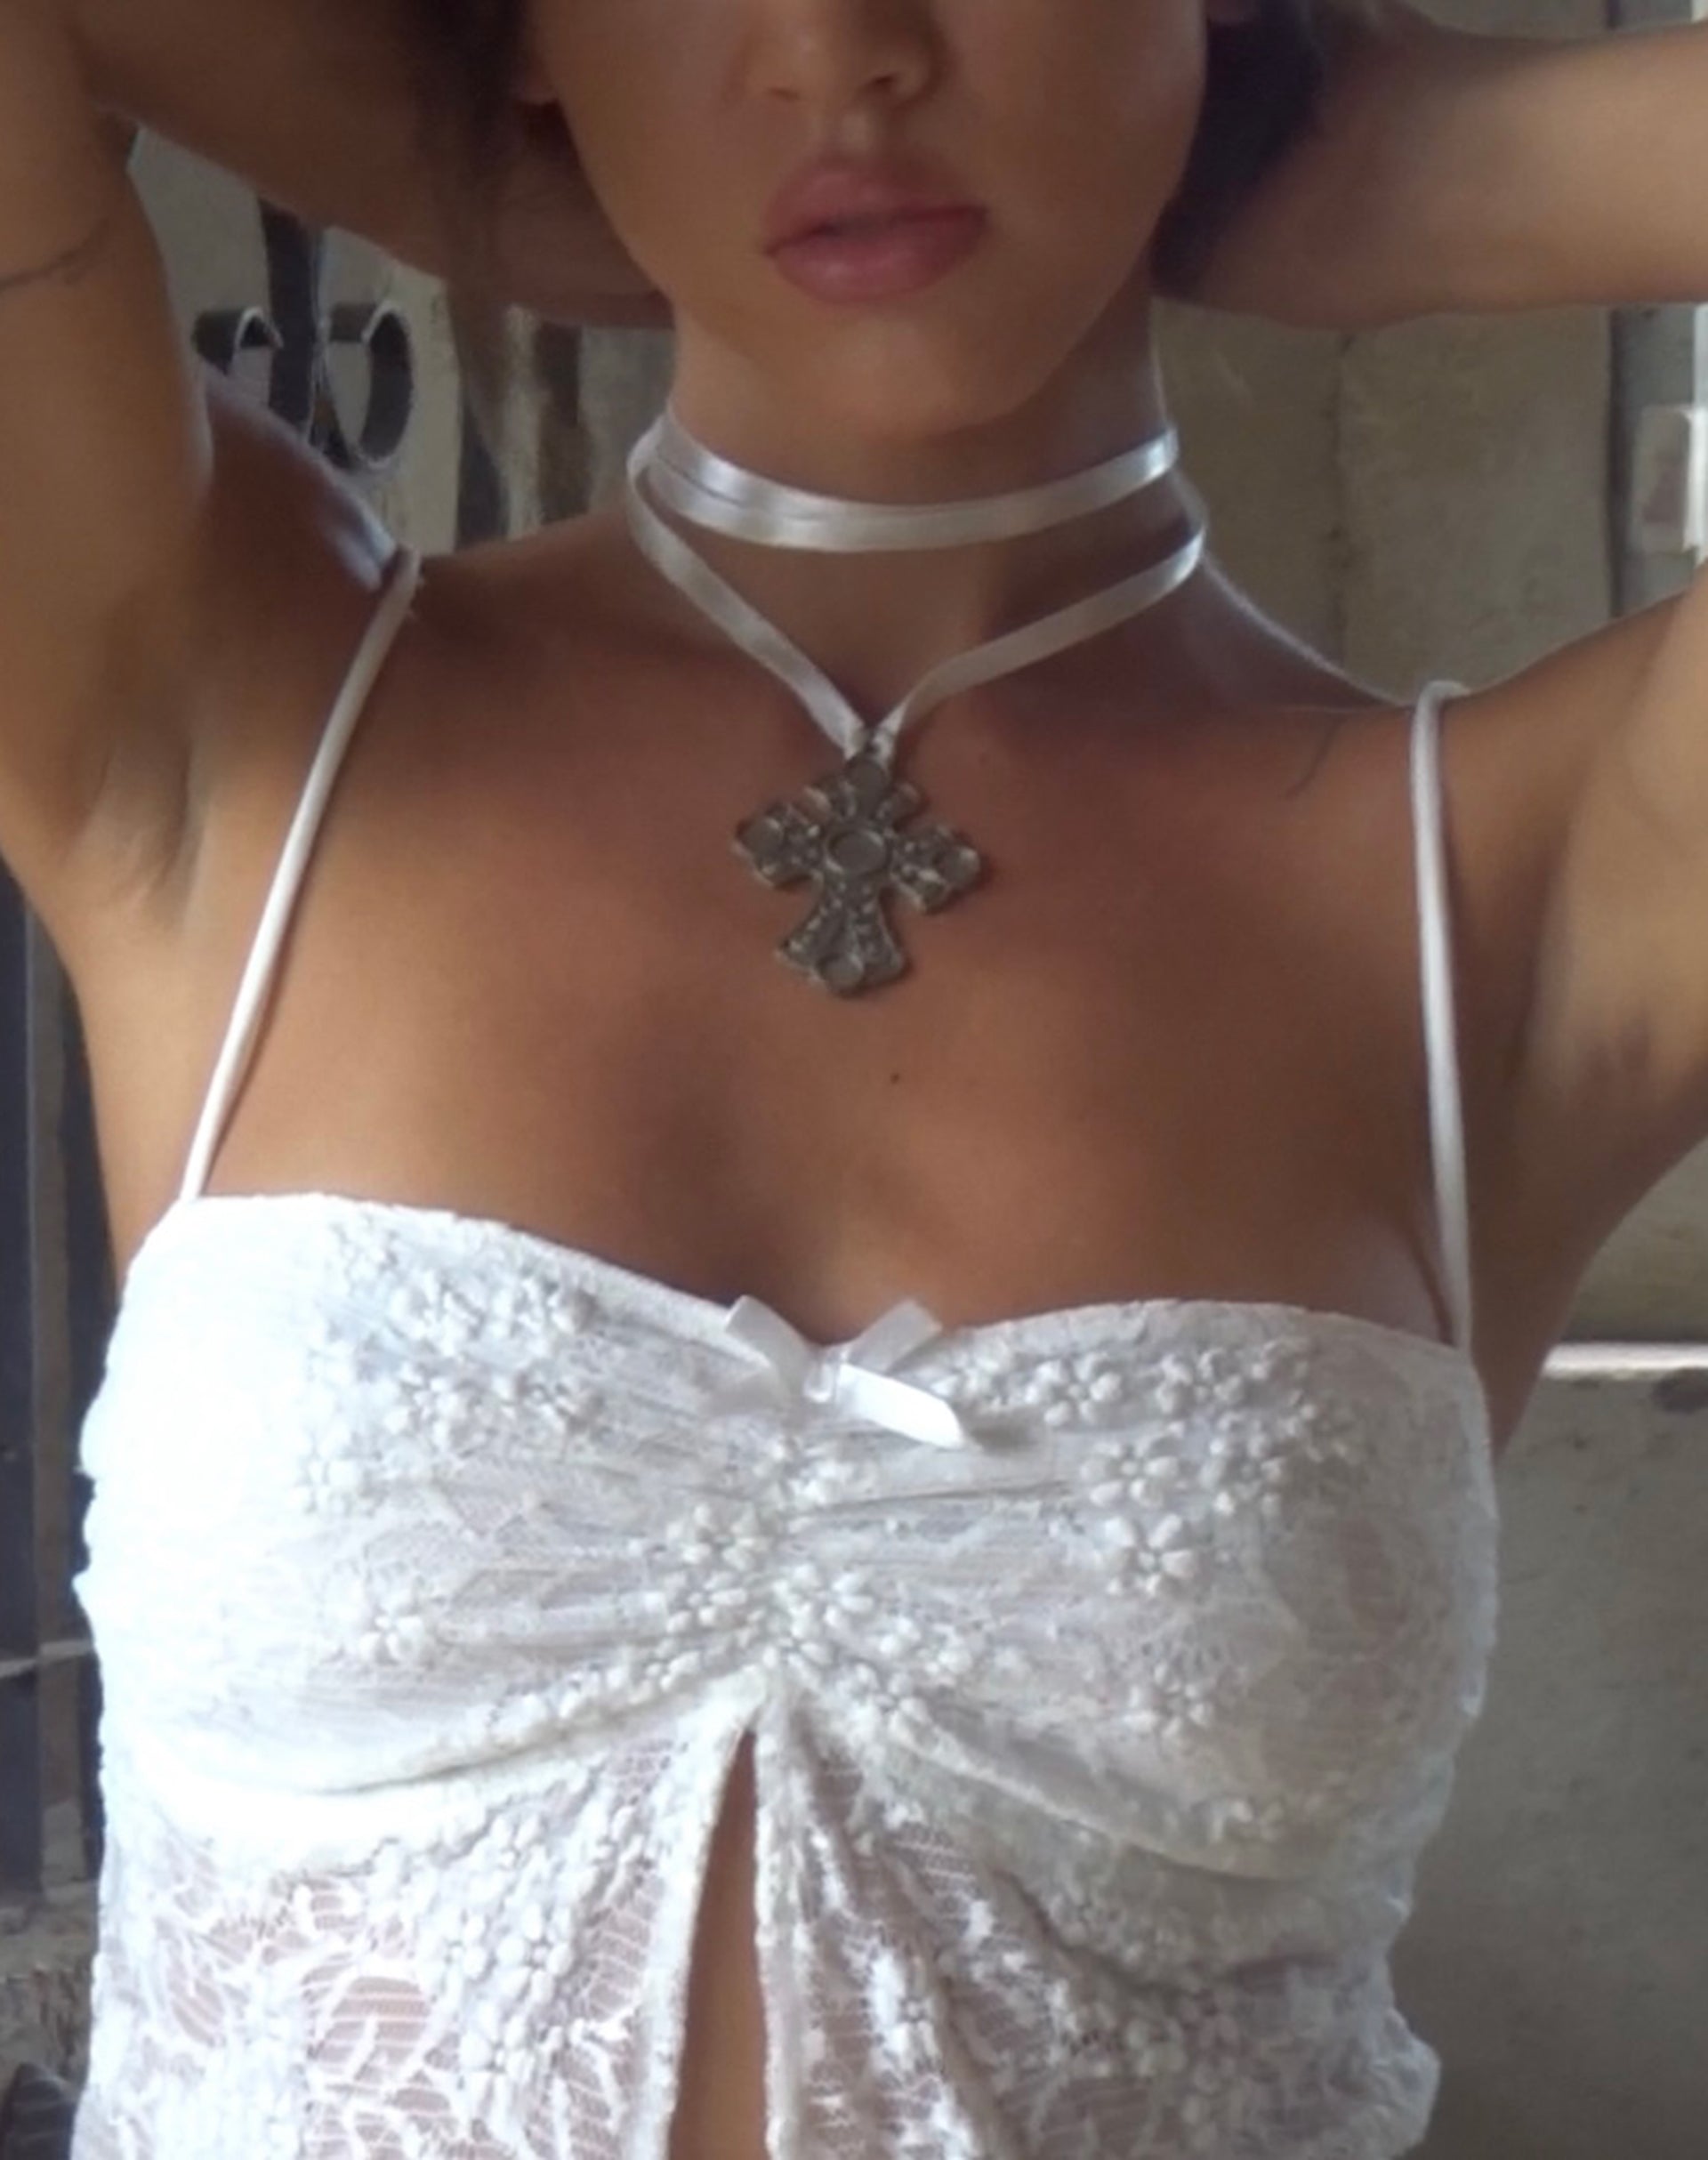 Image of Briony Butterfly Top in Lace Ivory